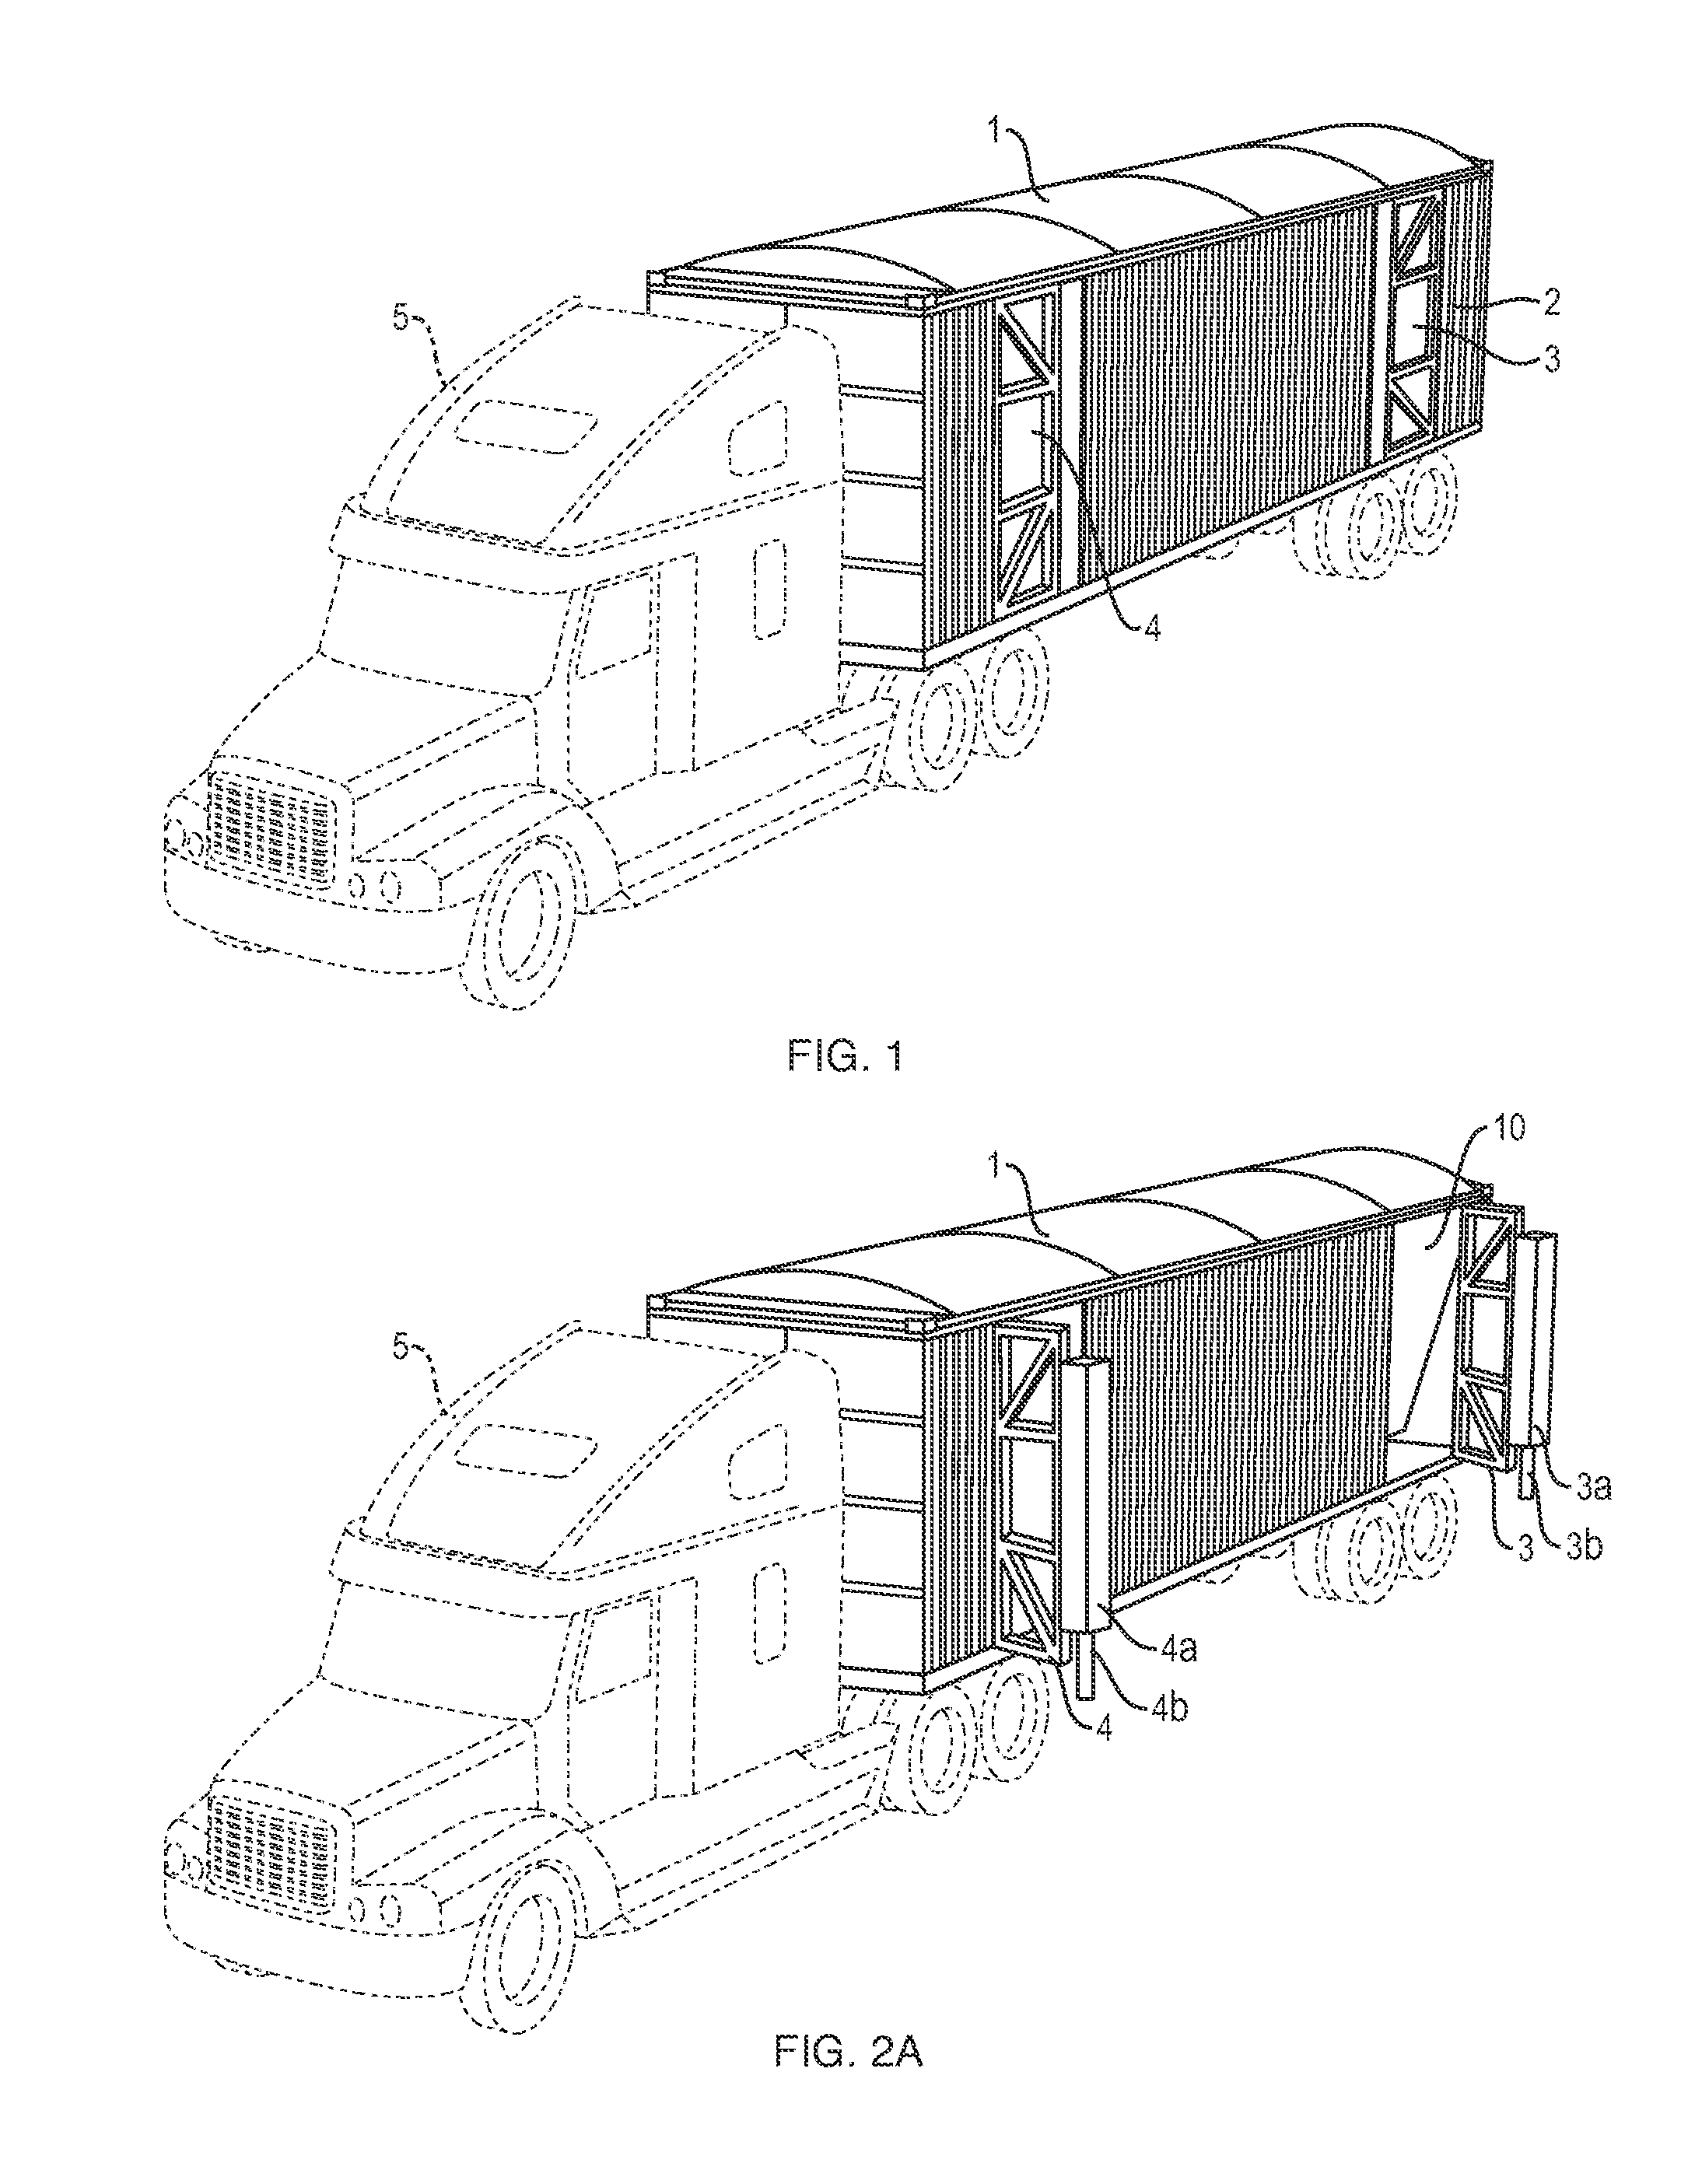 Photovoltaic power apparatus for rapid deployment